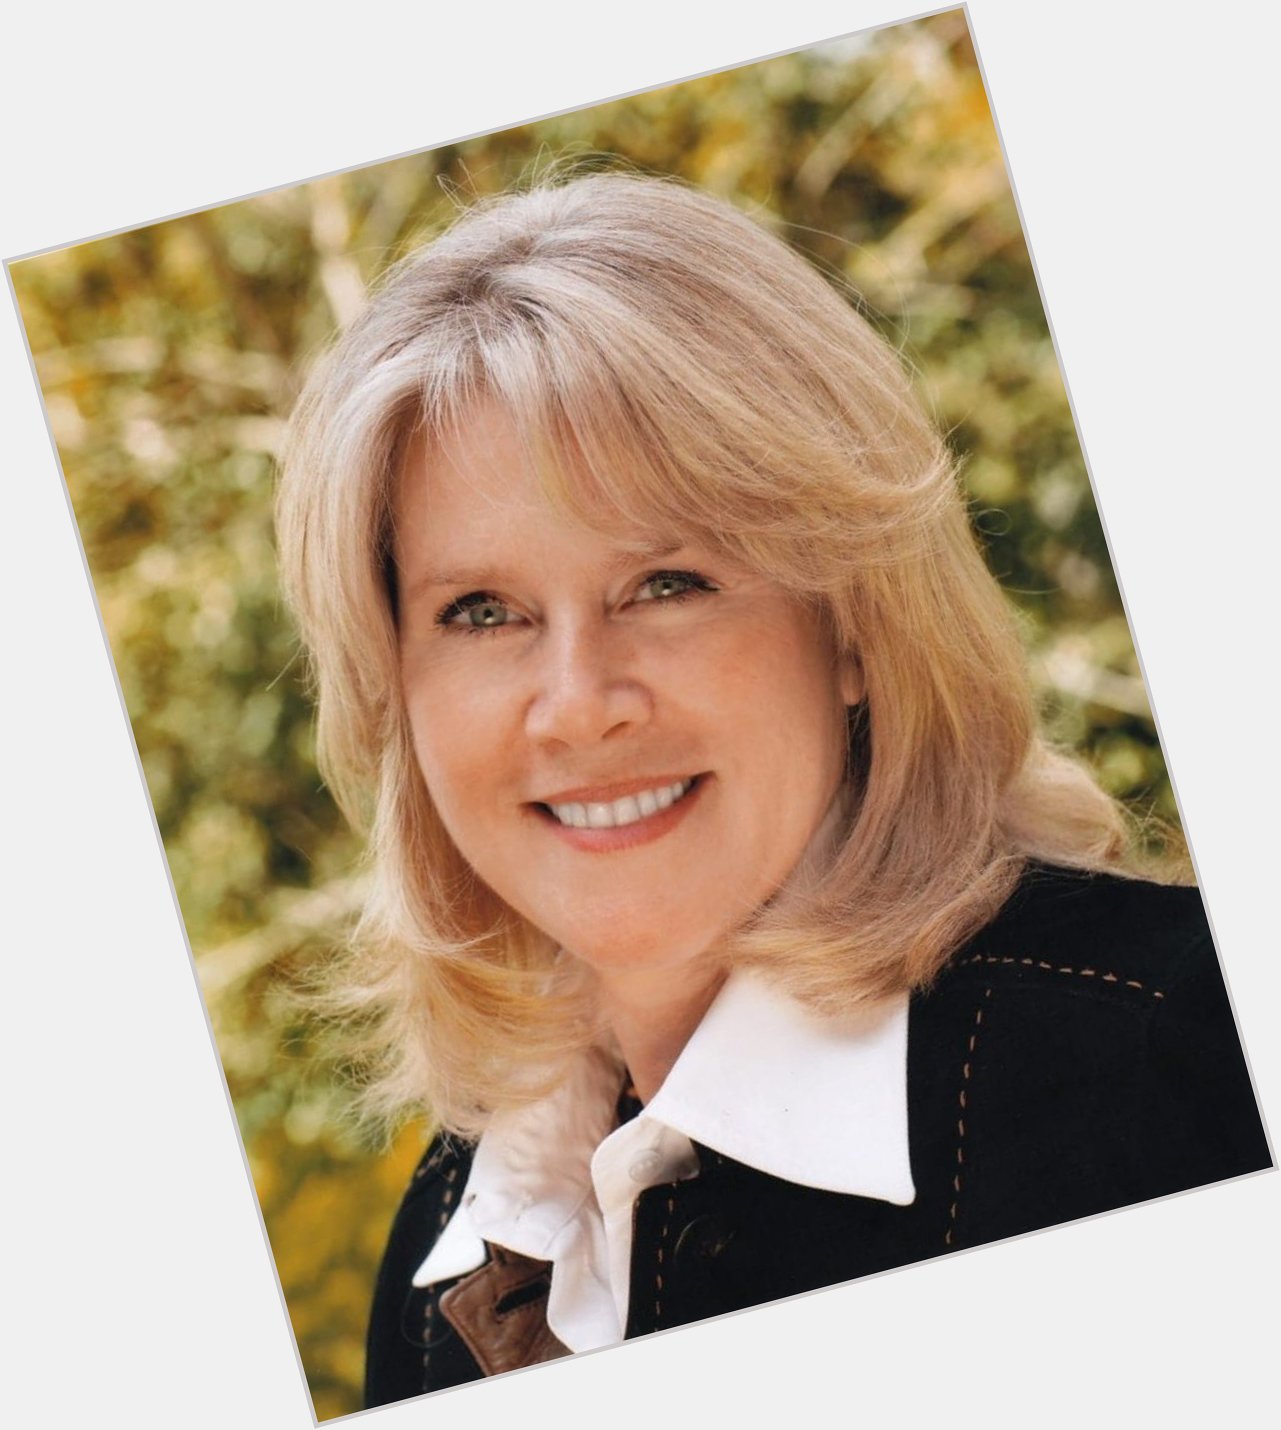 Happy Birthday former 2nd lady, Tipper Gore 